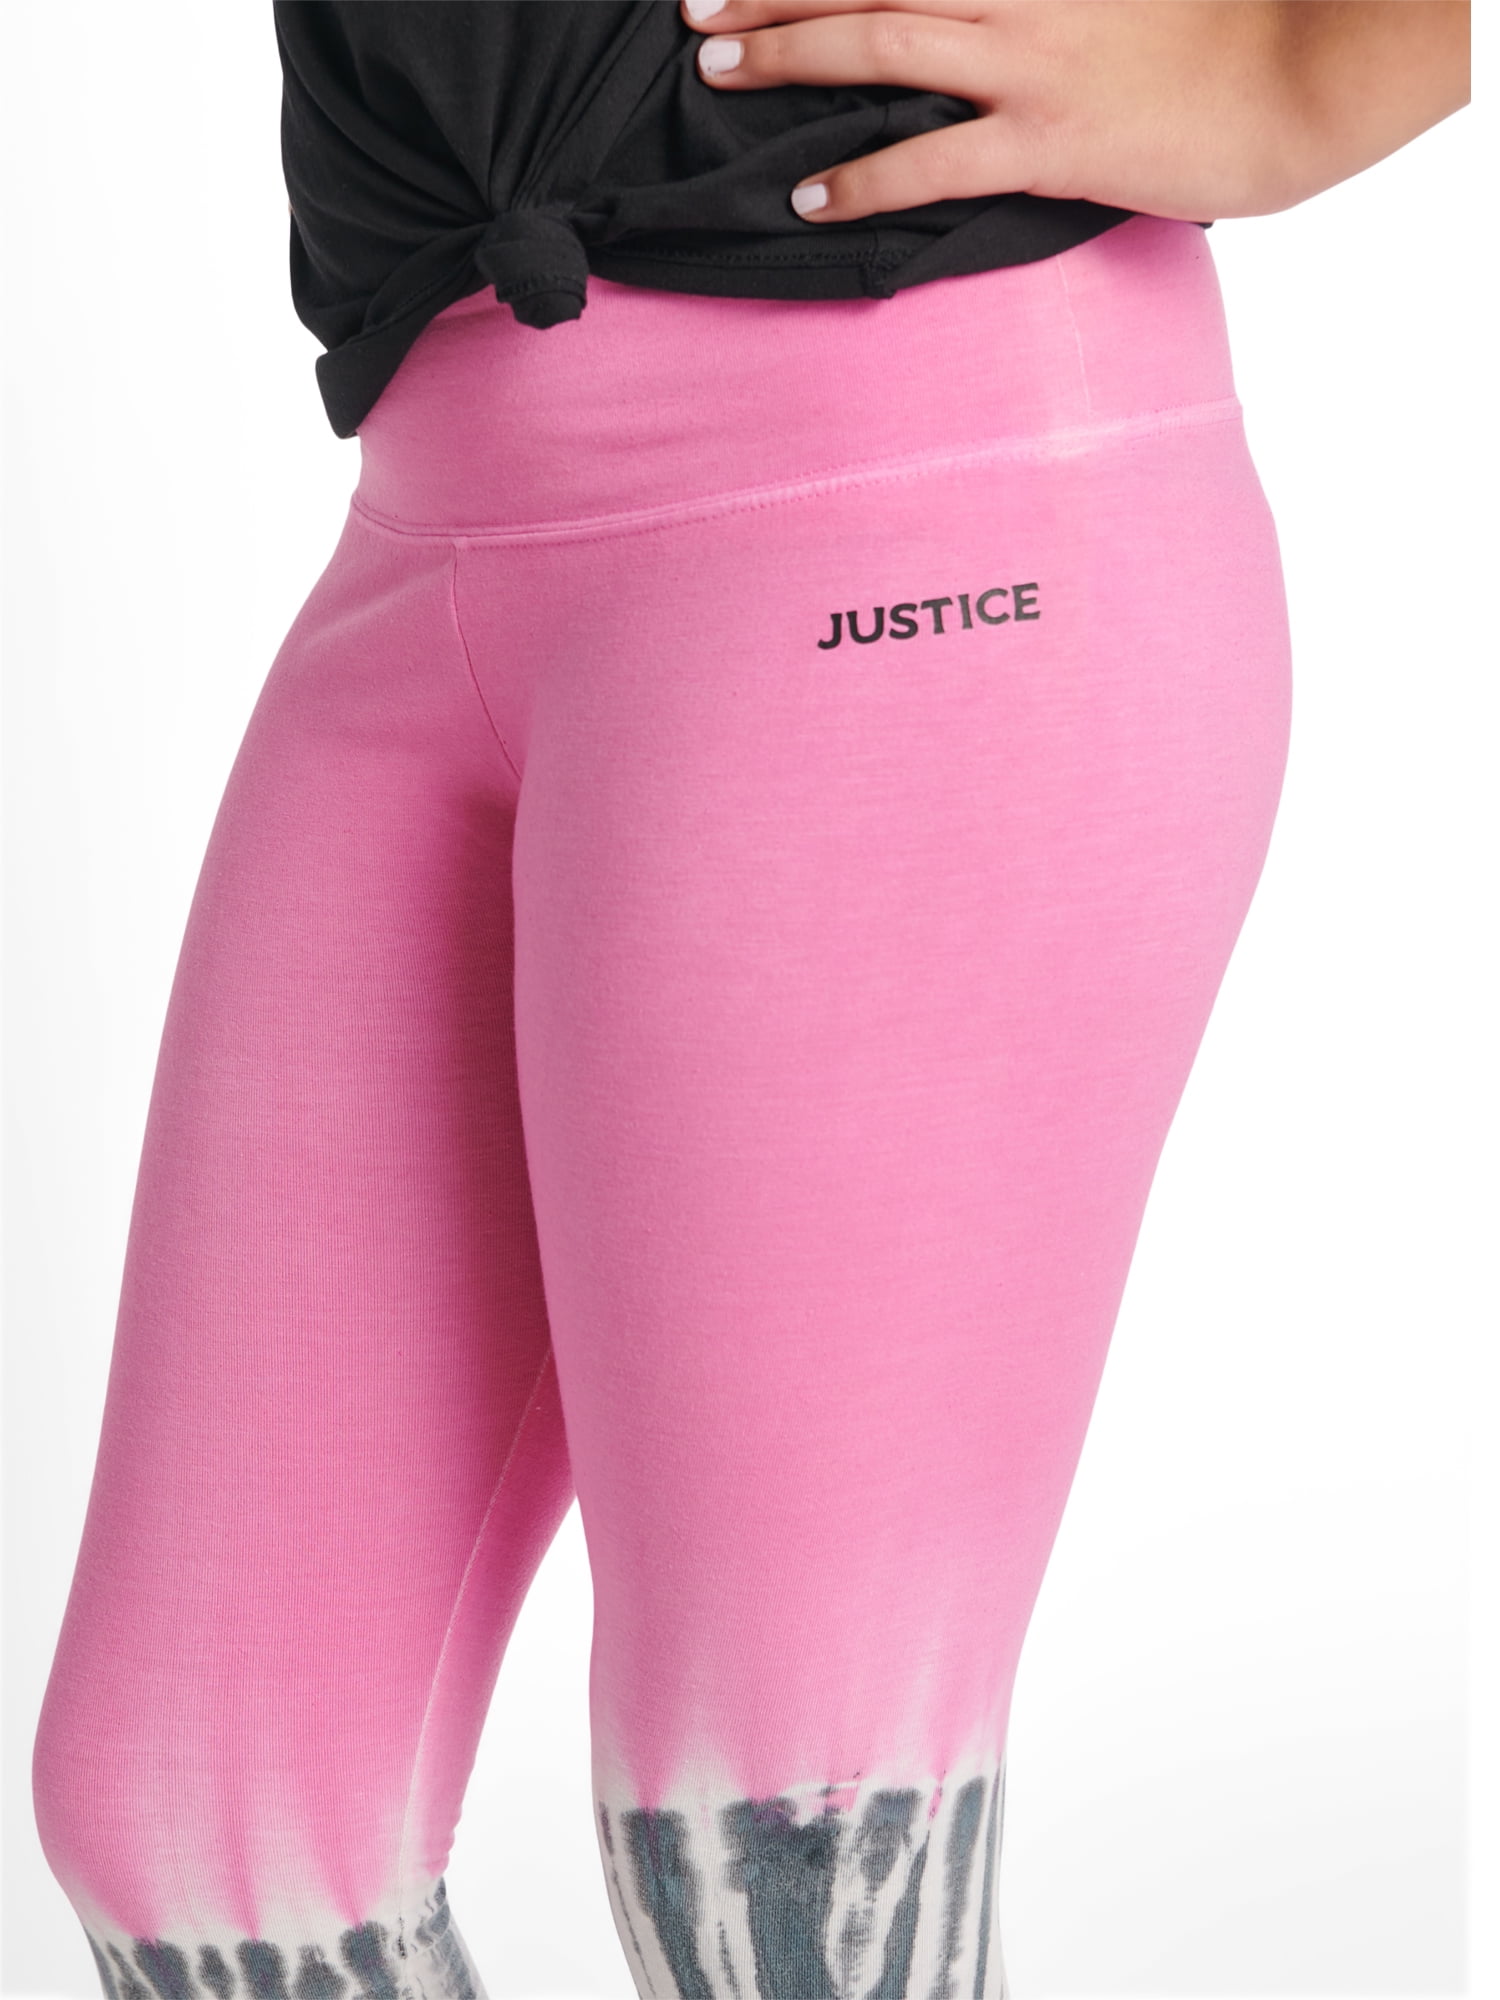 Justice, Bottoms, 3 Pears Of Justice Girls Leggings Parely Used